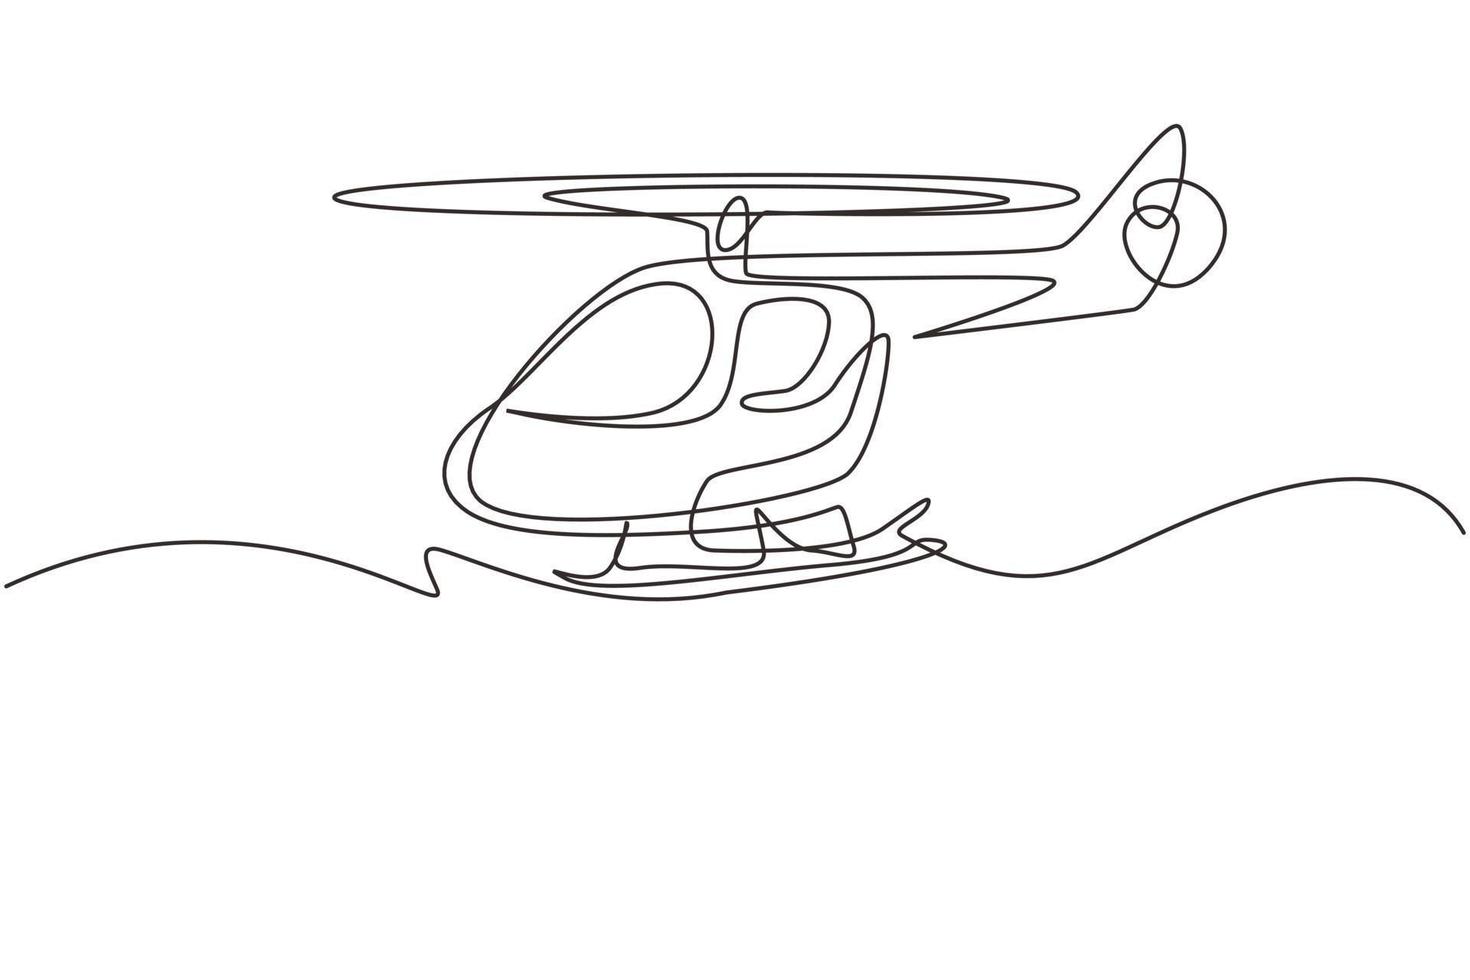 Continuous one line drawing toy helicopter. Children toys, air vehicles. Flying helicopter, for transportation. Transport for flight in air. Single line draw design vector graphic illustration